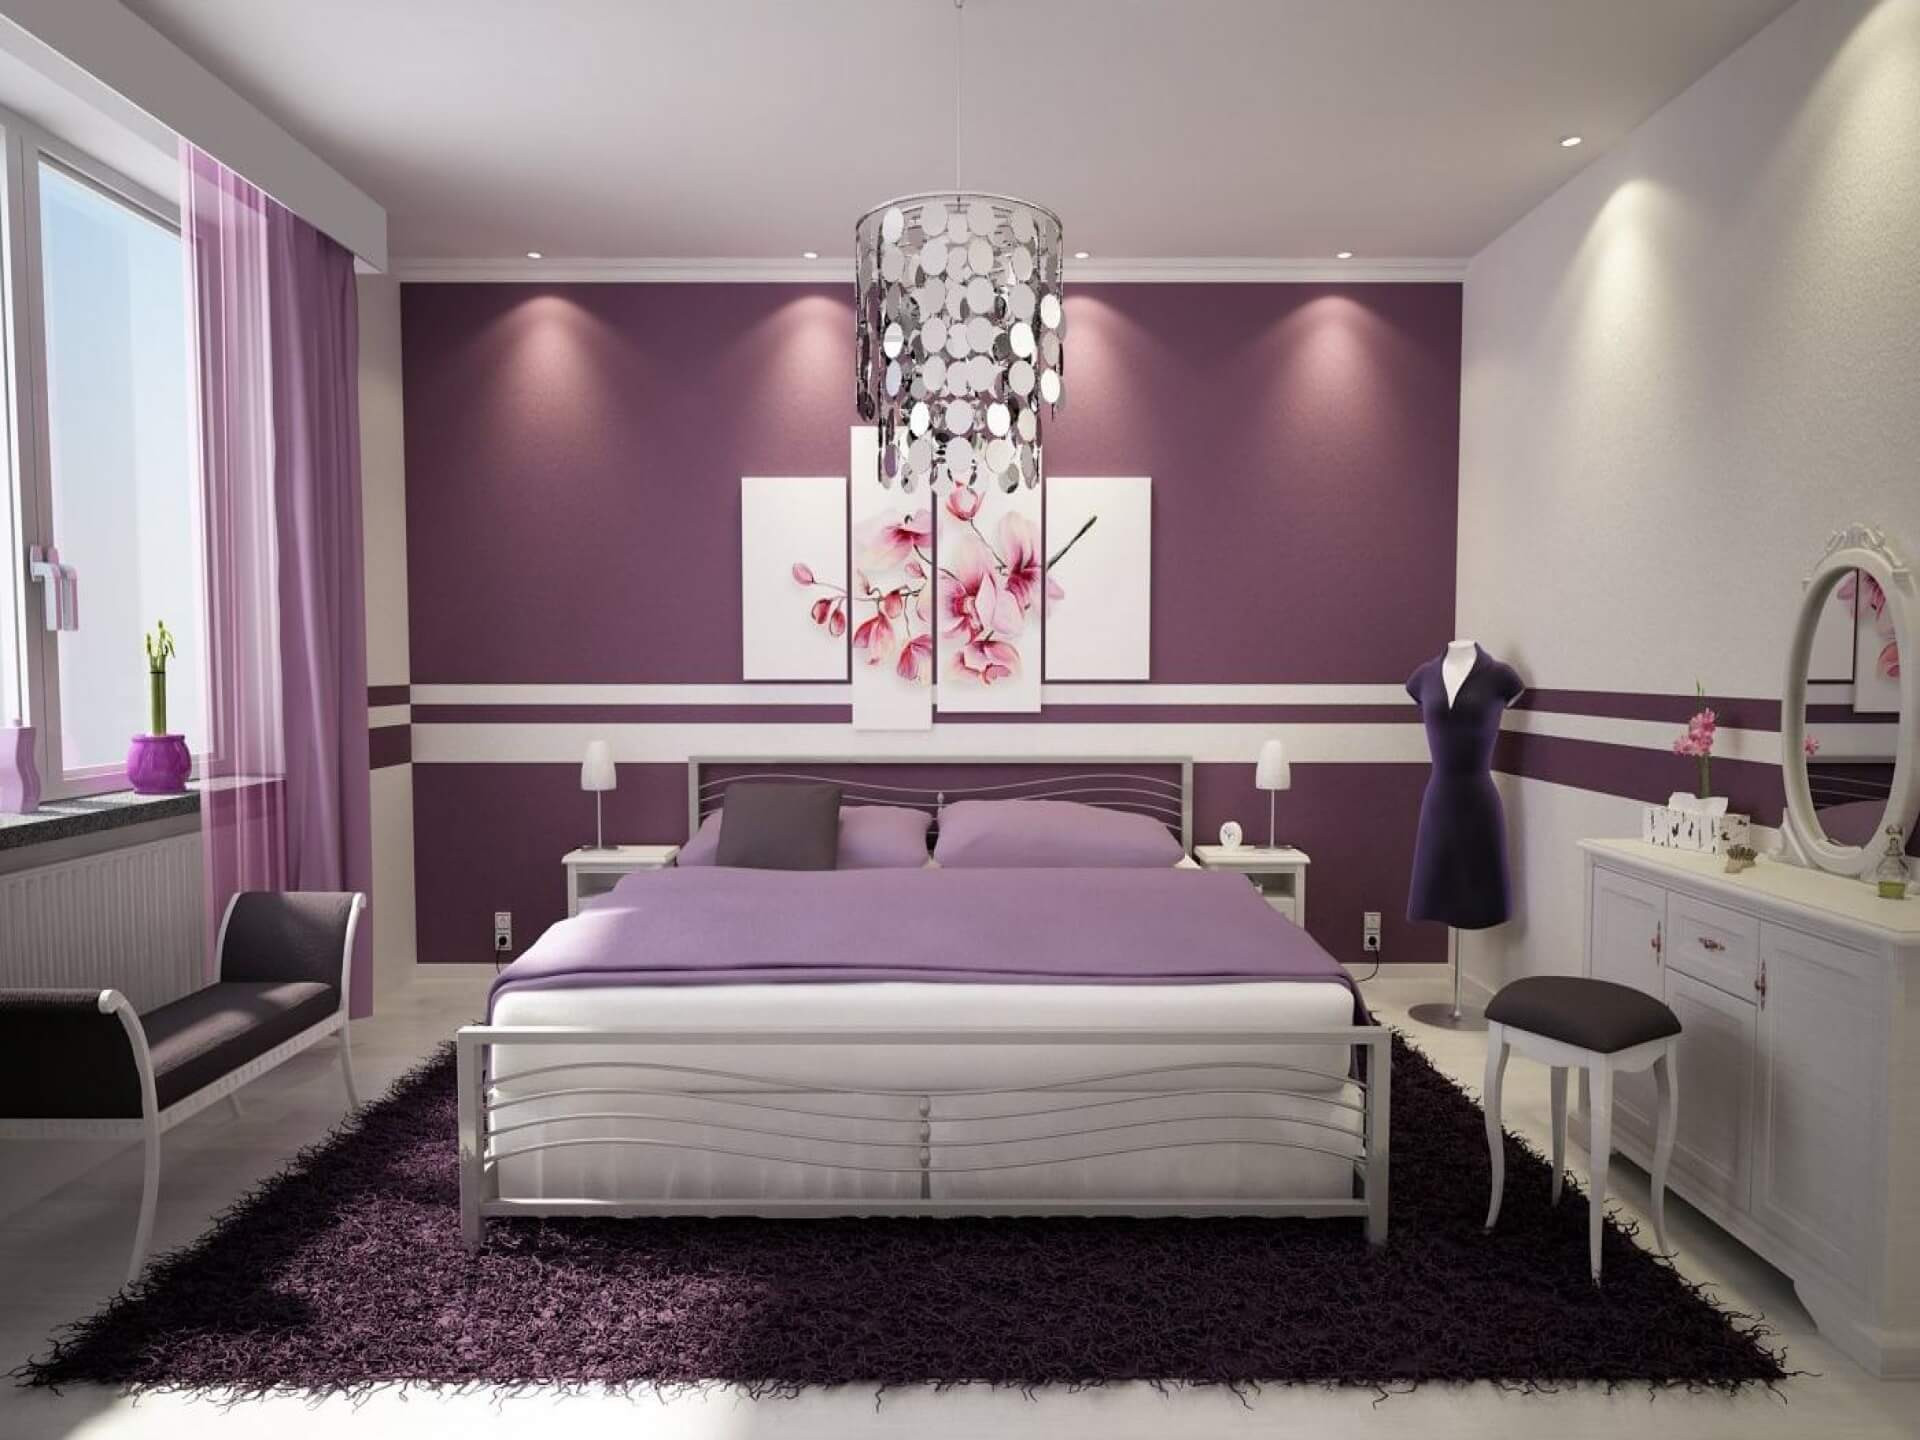 Small Bedroom Paint Ideas Pictures
 Top 10 Girls Bedroom Paint Ideas 2017 TheyDesign